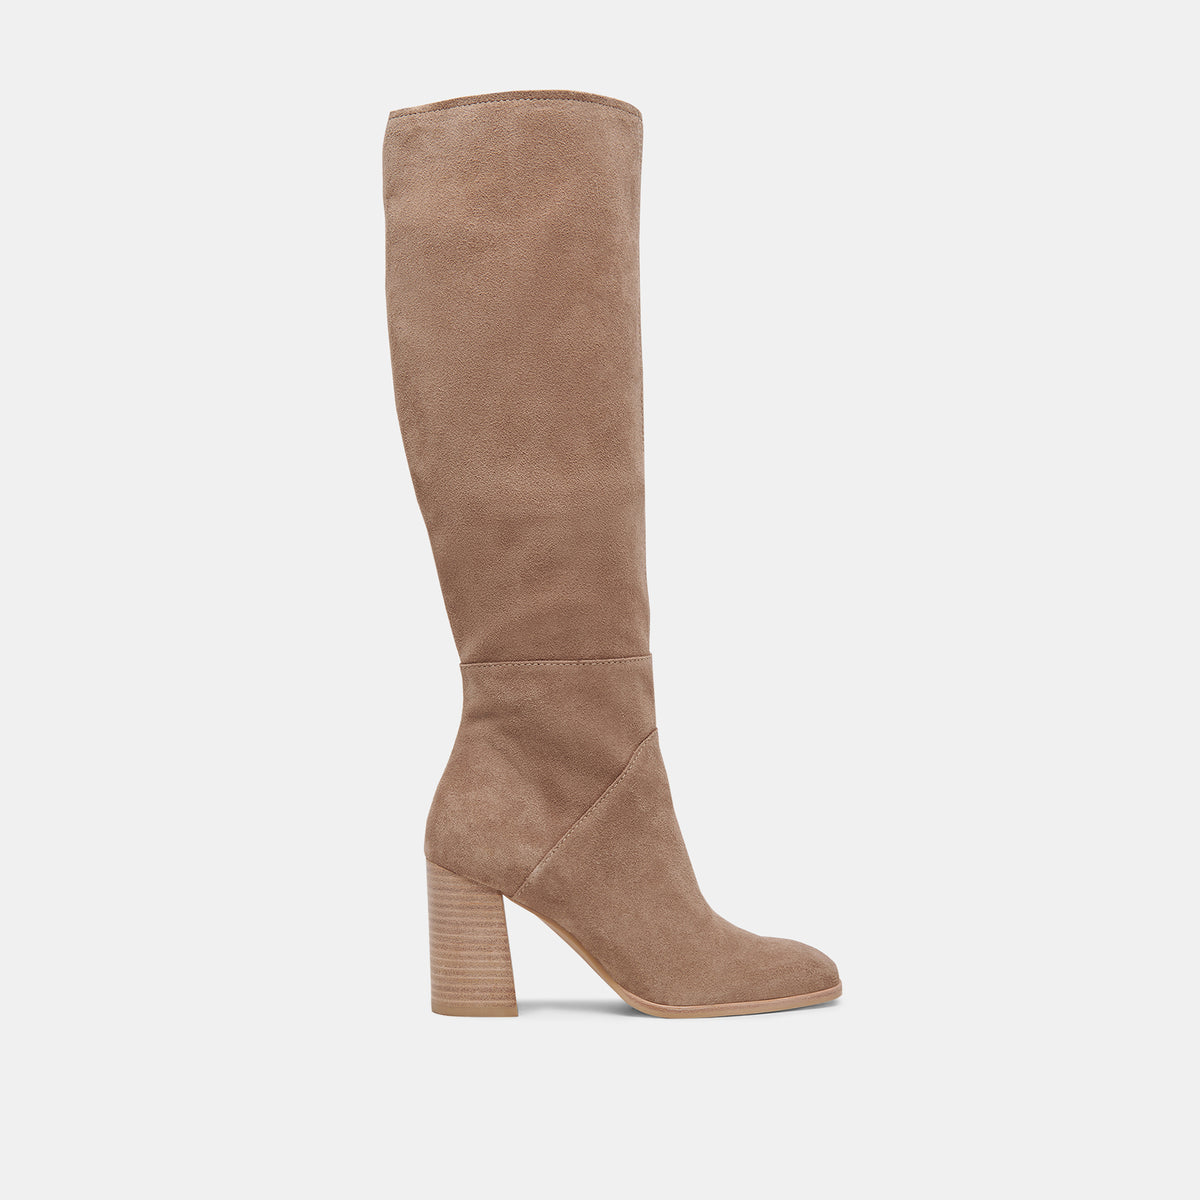 FYNN Wide Calf Boots Truffle Suede | Truffle Suede Knee-High Boots ...